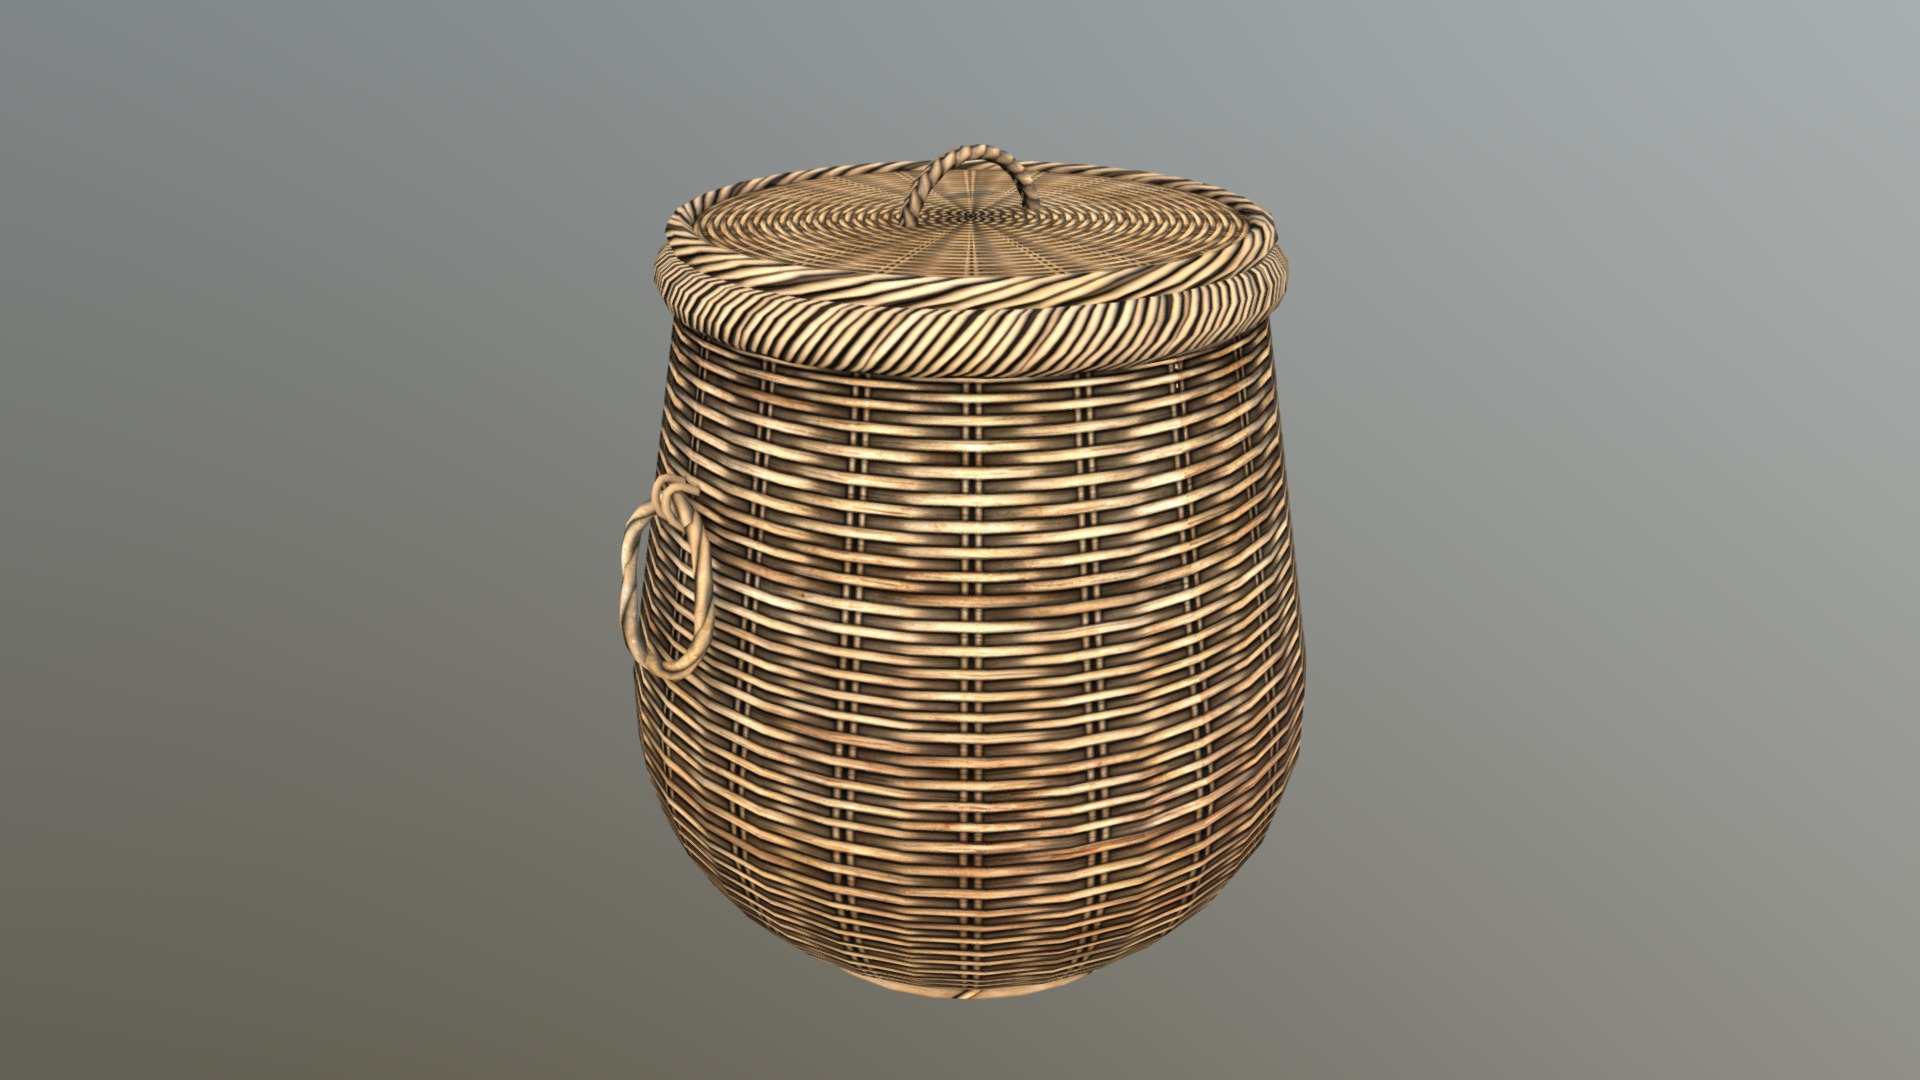 3D model Low Poly Basket 01 - This is a 3D model of the Low Poly Basket 01. The 3D model is about a gold and silver metal container.